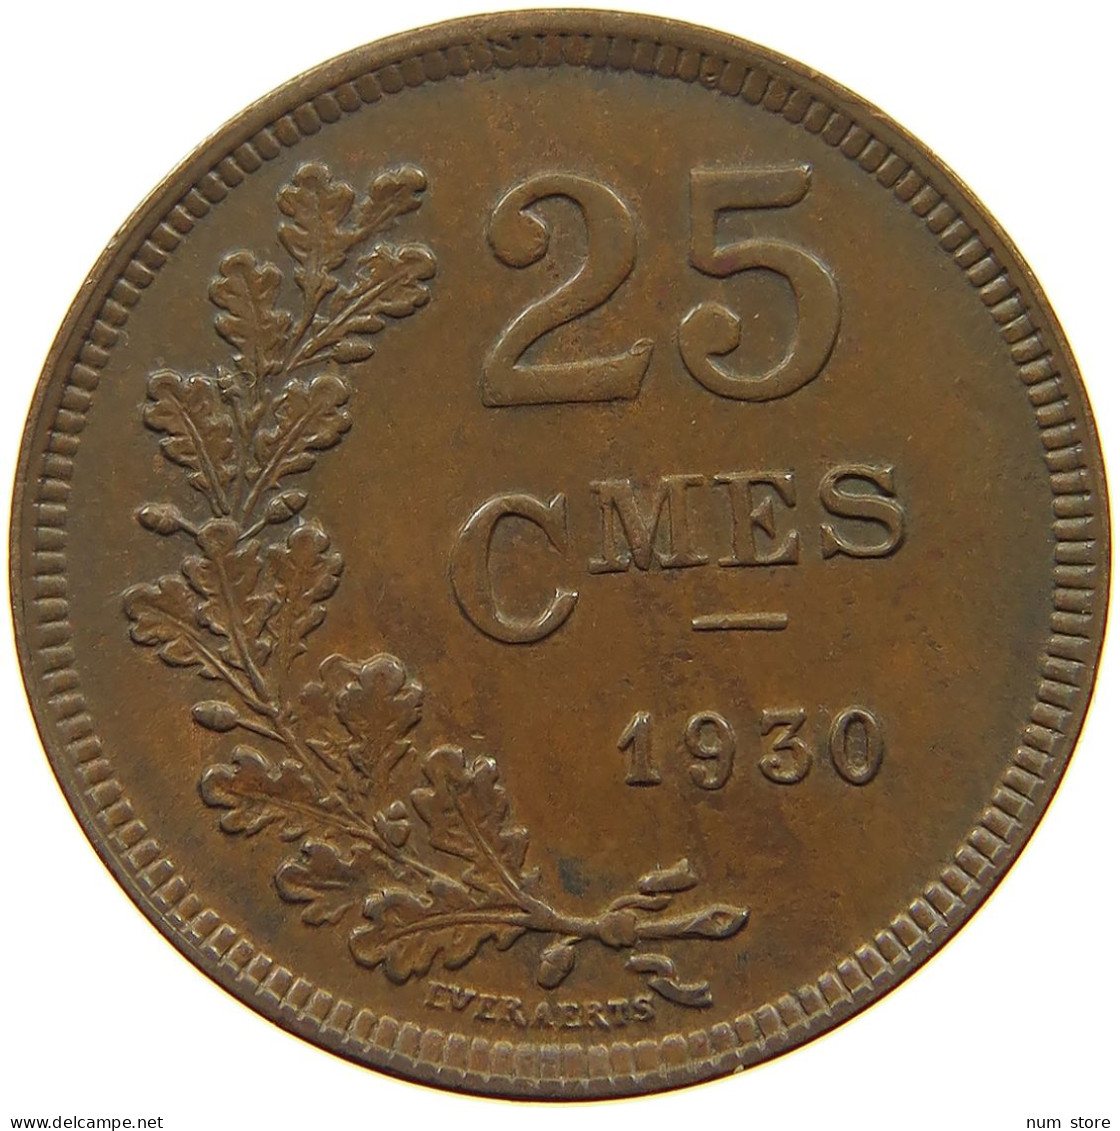 LUXEMBOURG 25 CENTIMES 1930 Charlotte (1919-1964) #a095 0325 - Luxembourg